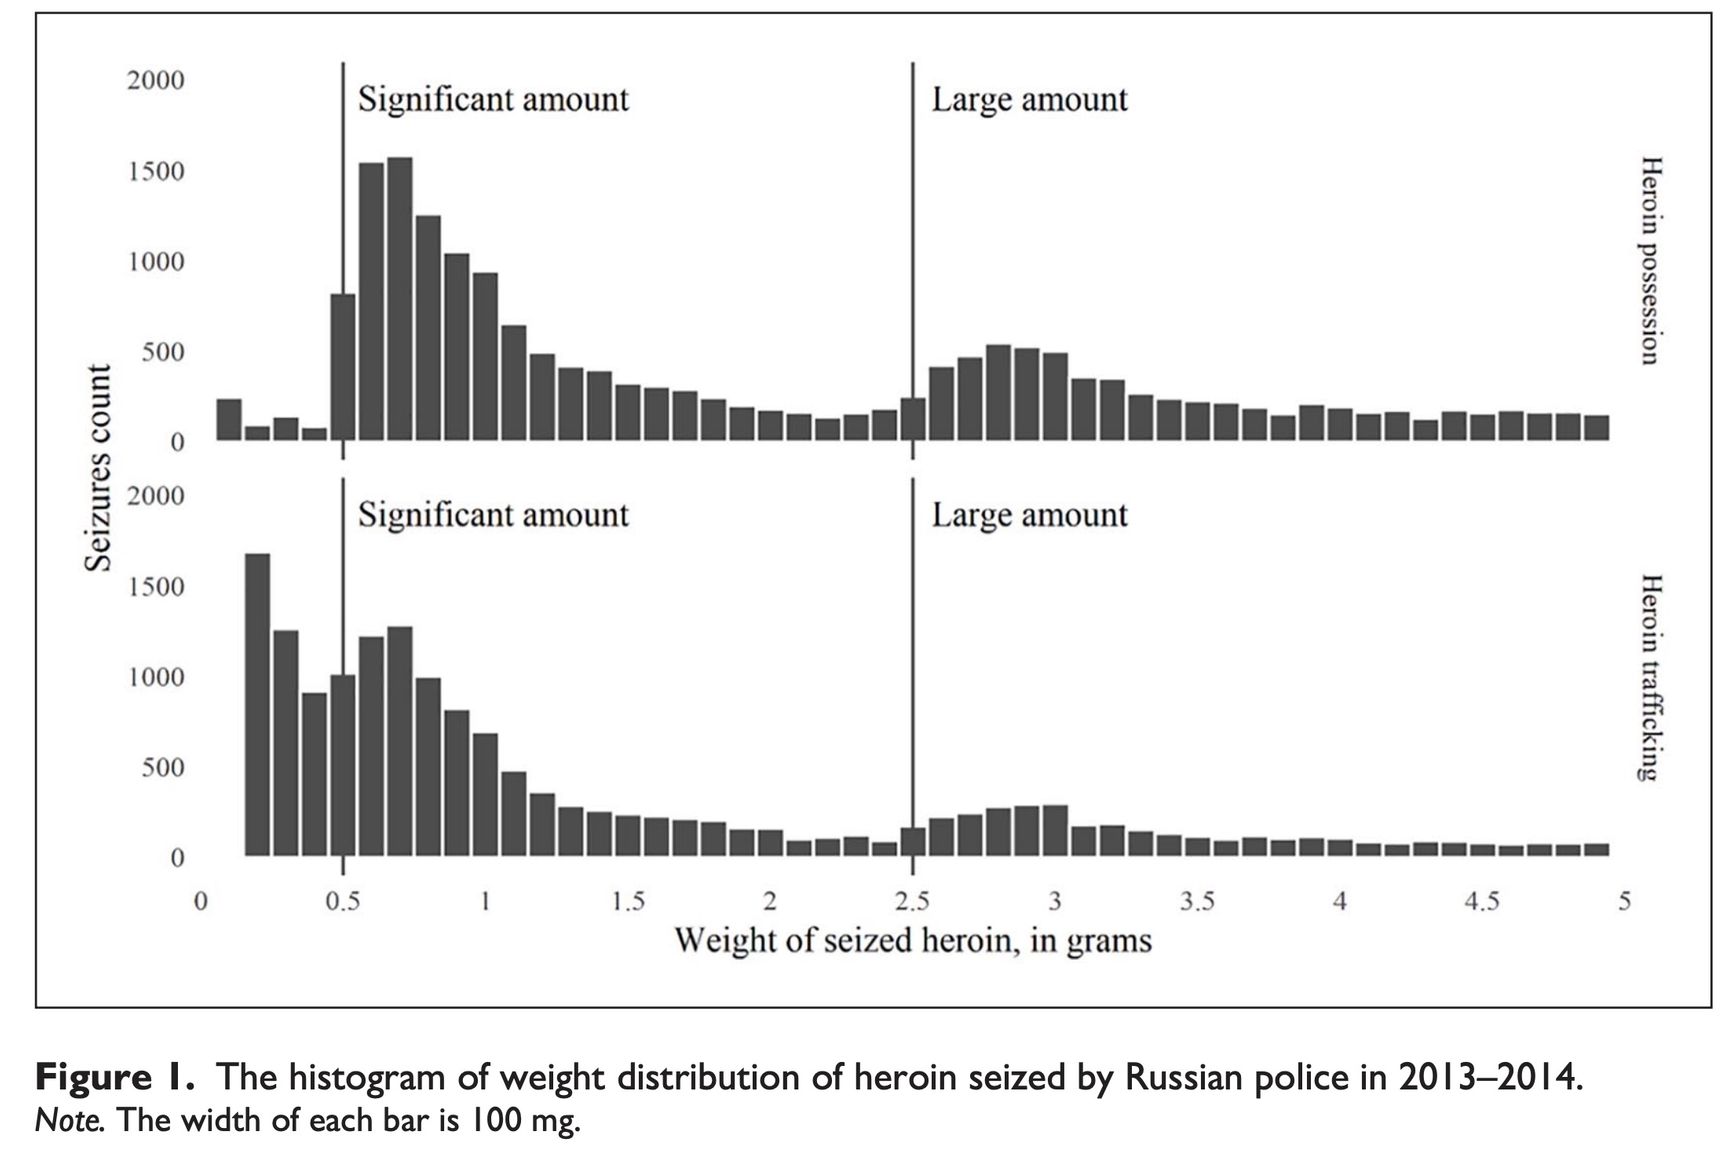 From A. Knorre "Do Russian Police Fabricate Drug Offenses? Evidence From Seized Heroin’s Weight Distribution" (2020)